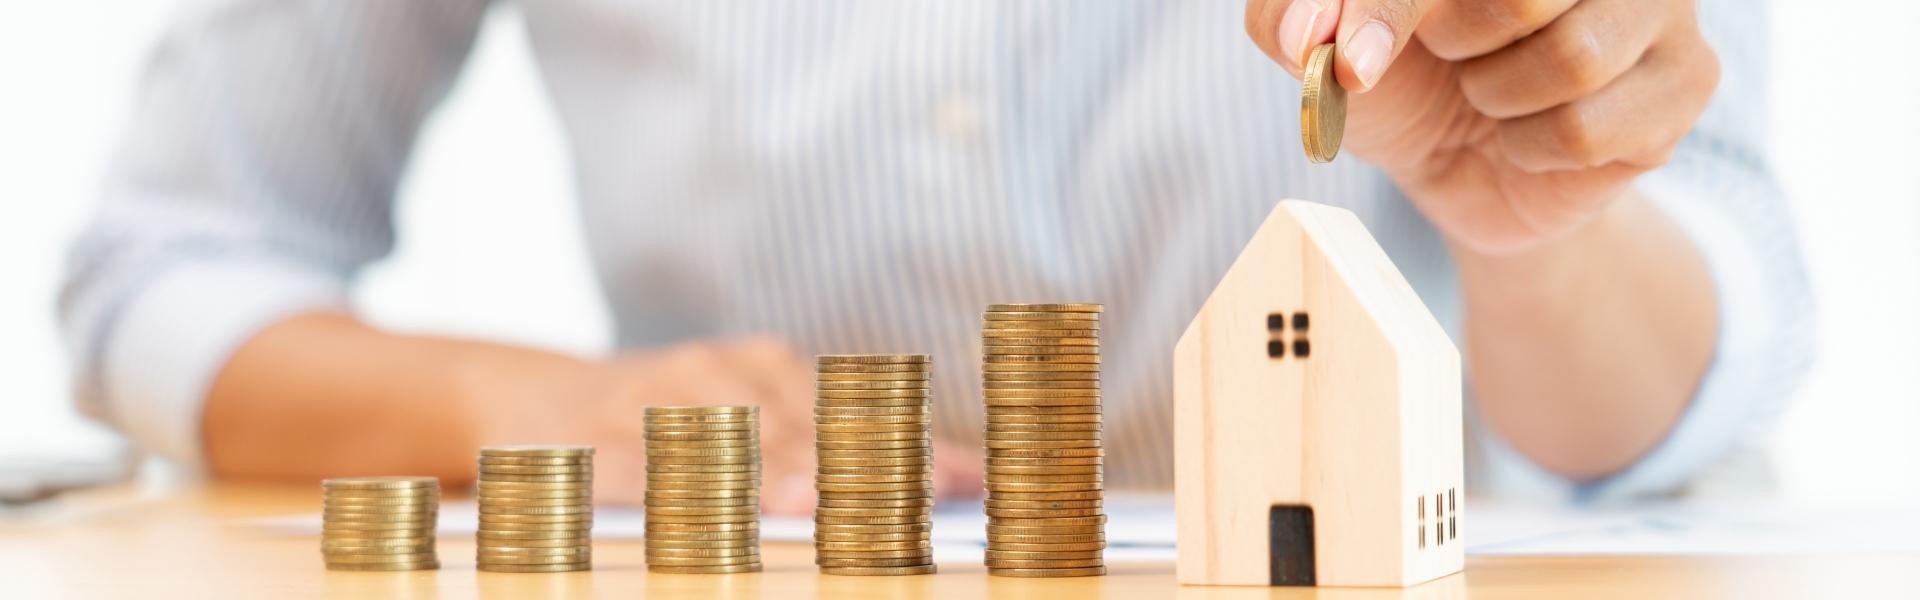 California VA Refinancing Options For Eligible Homeowners header image. Photo of a man putting a coin into a house-shaped piggybank. To the side of the house, are different stacks of coins making the shape of a bar graph to represent increase in value of the home.